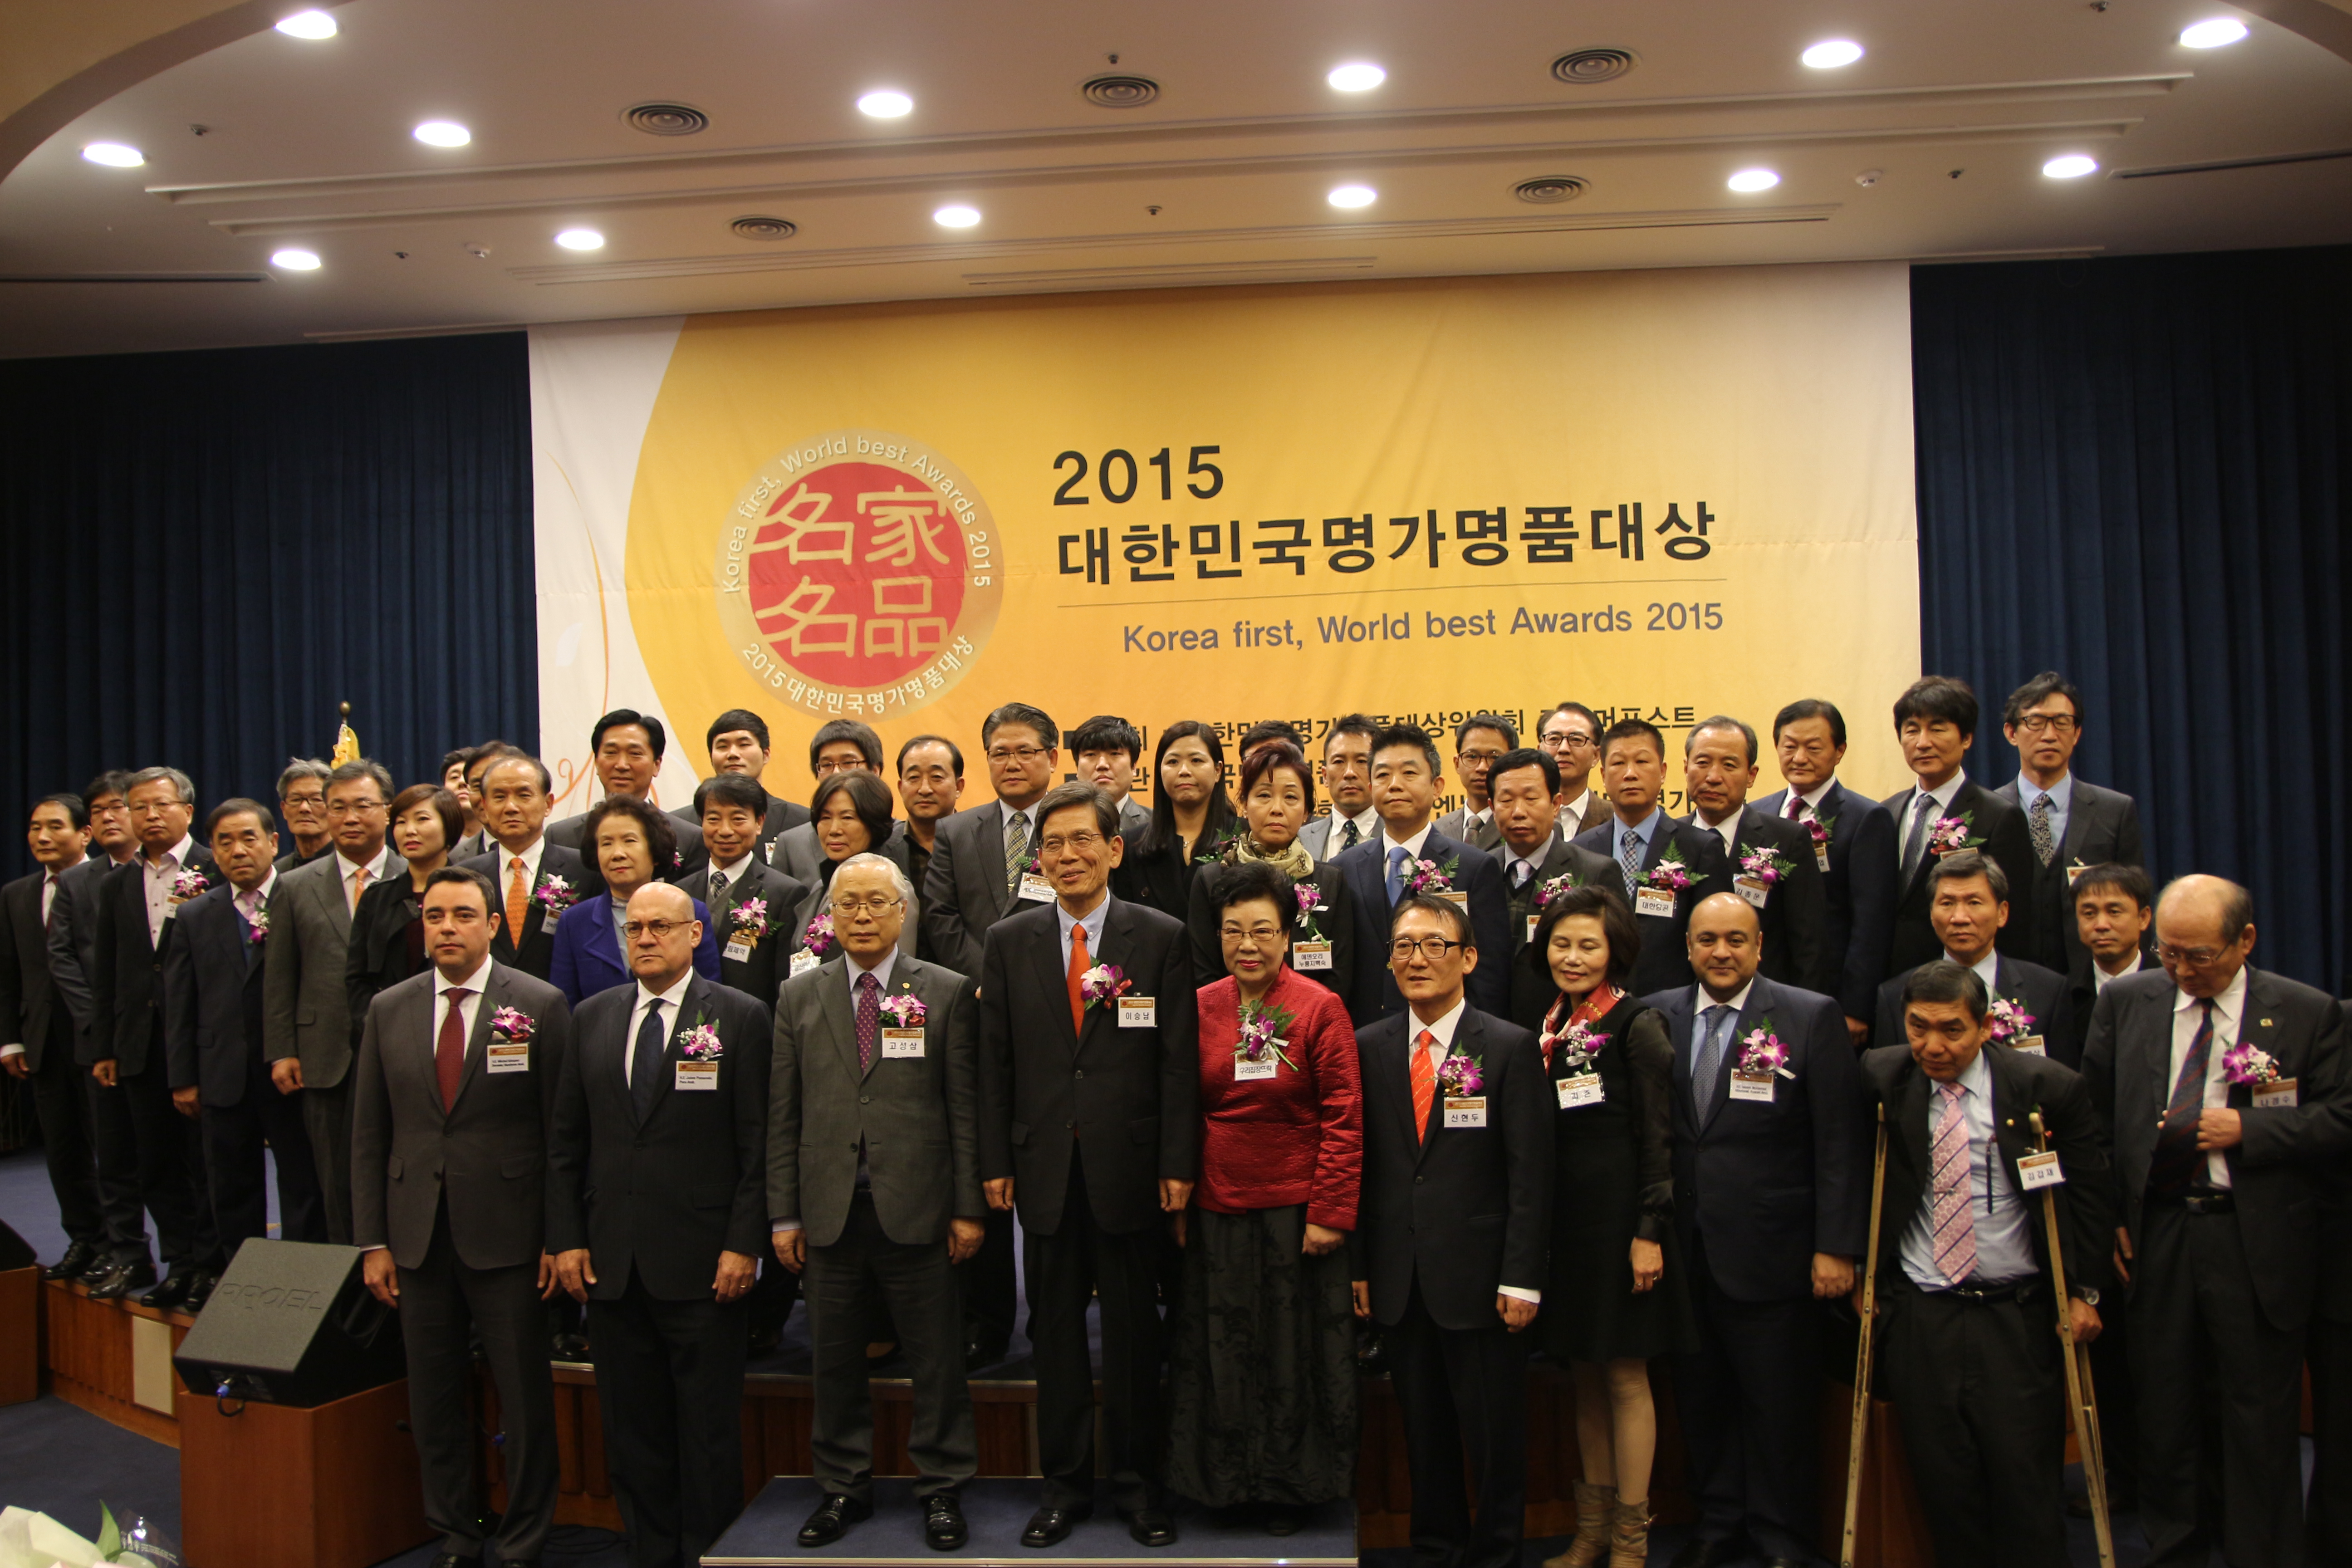 Attendees at NDNnews and SeoulCity Magazine award ceremony